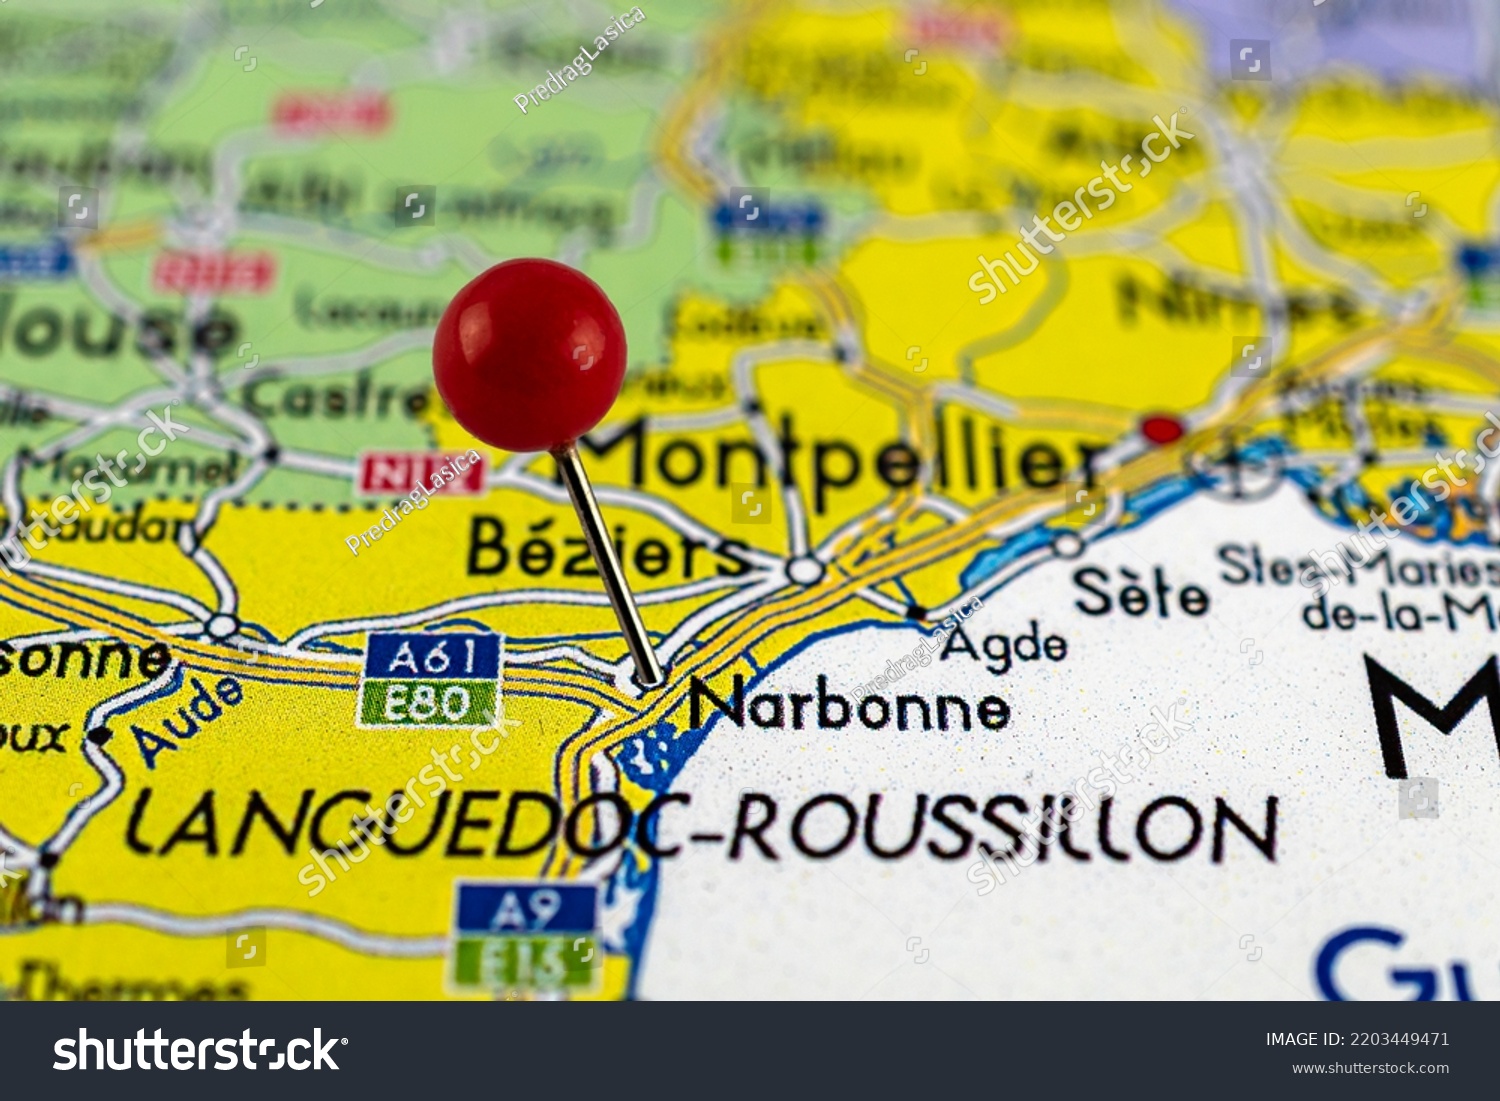 Narbonne Map Close Narbonne Map Red Stock Photo 2203449471 | Shutterstock